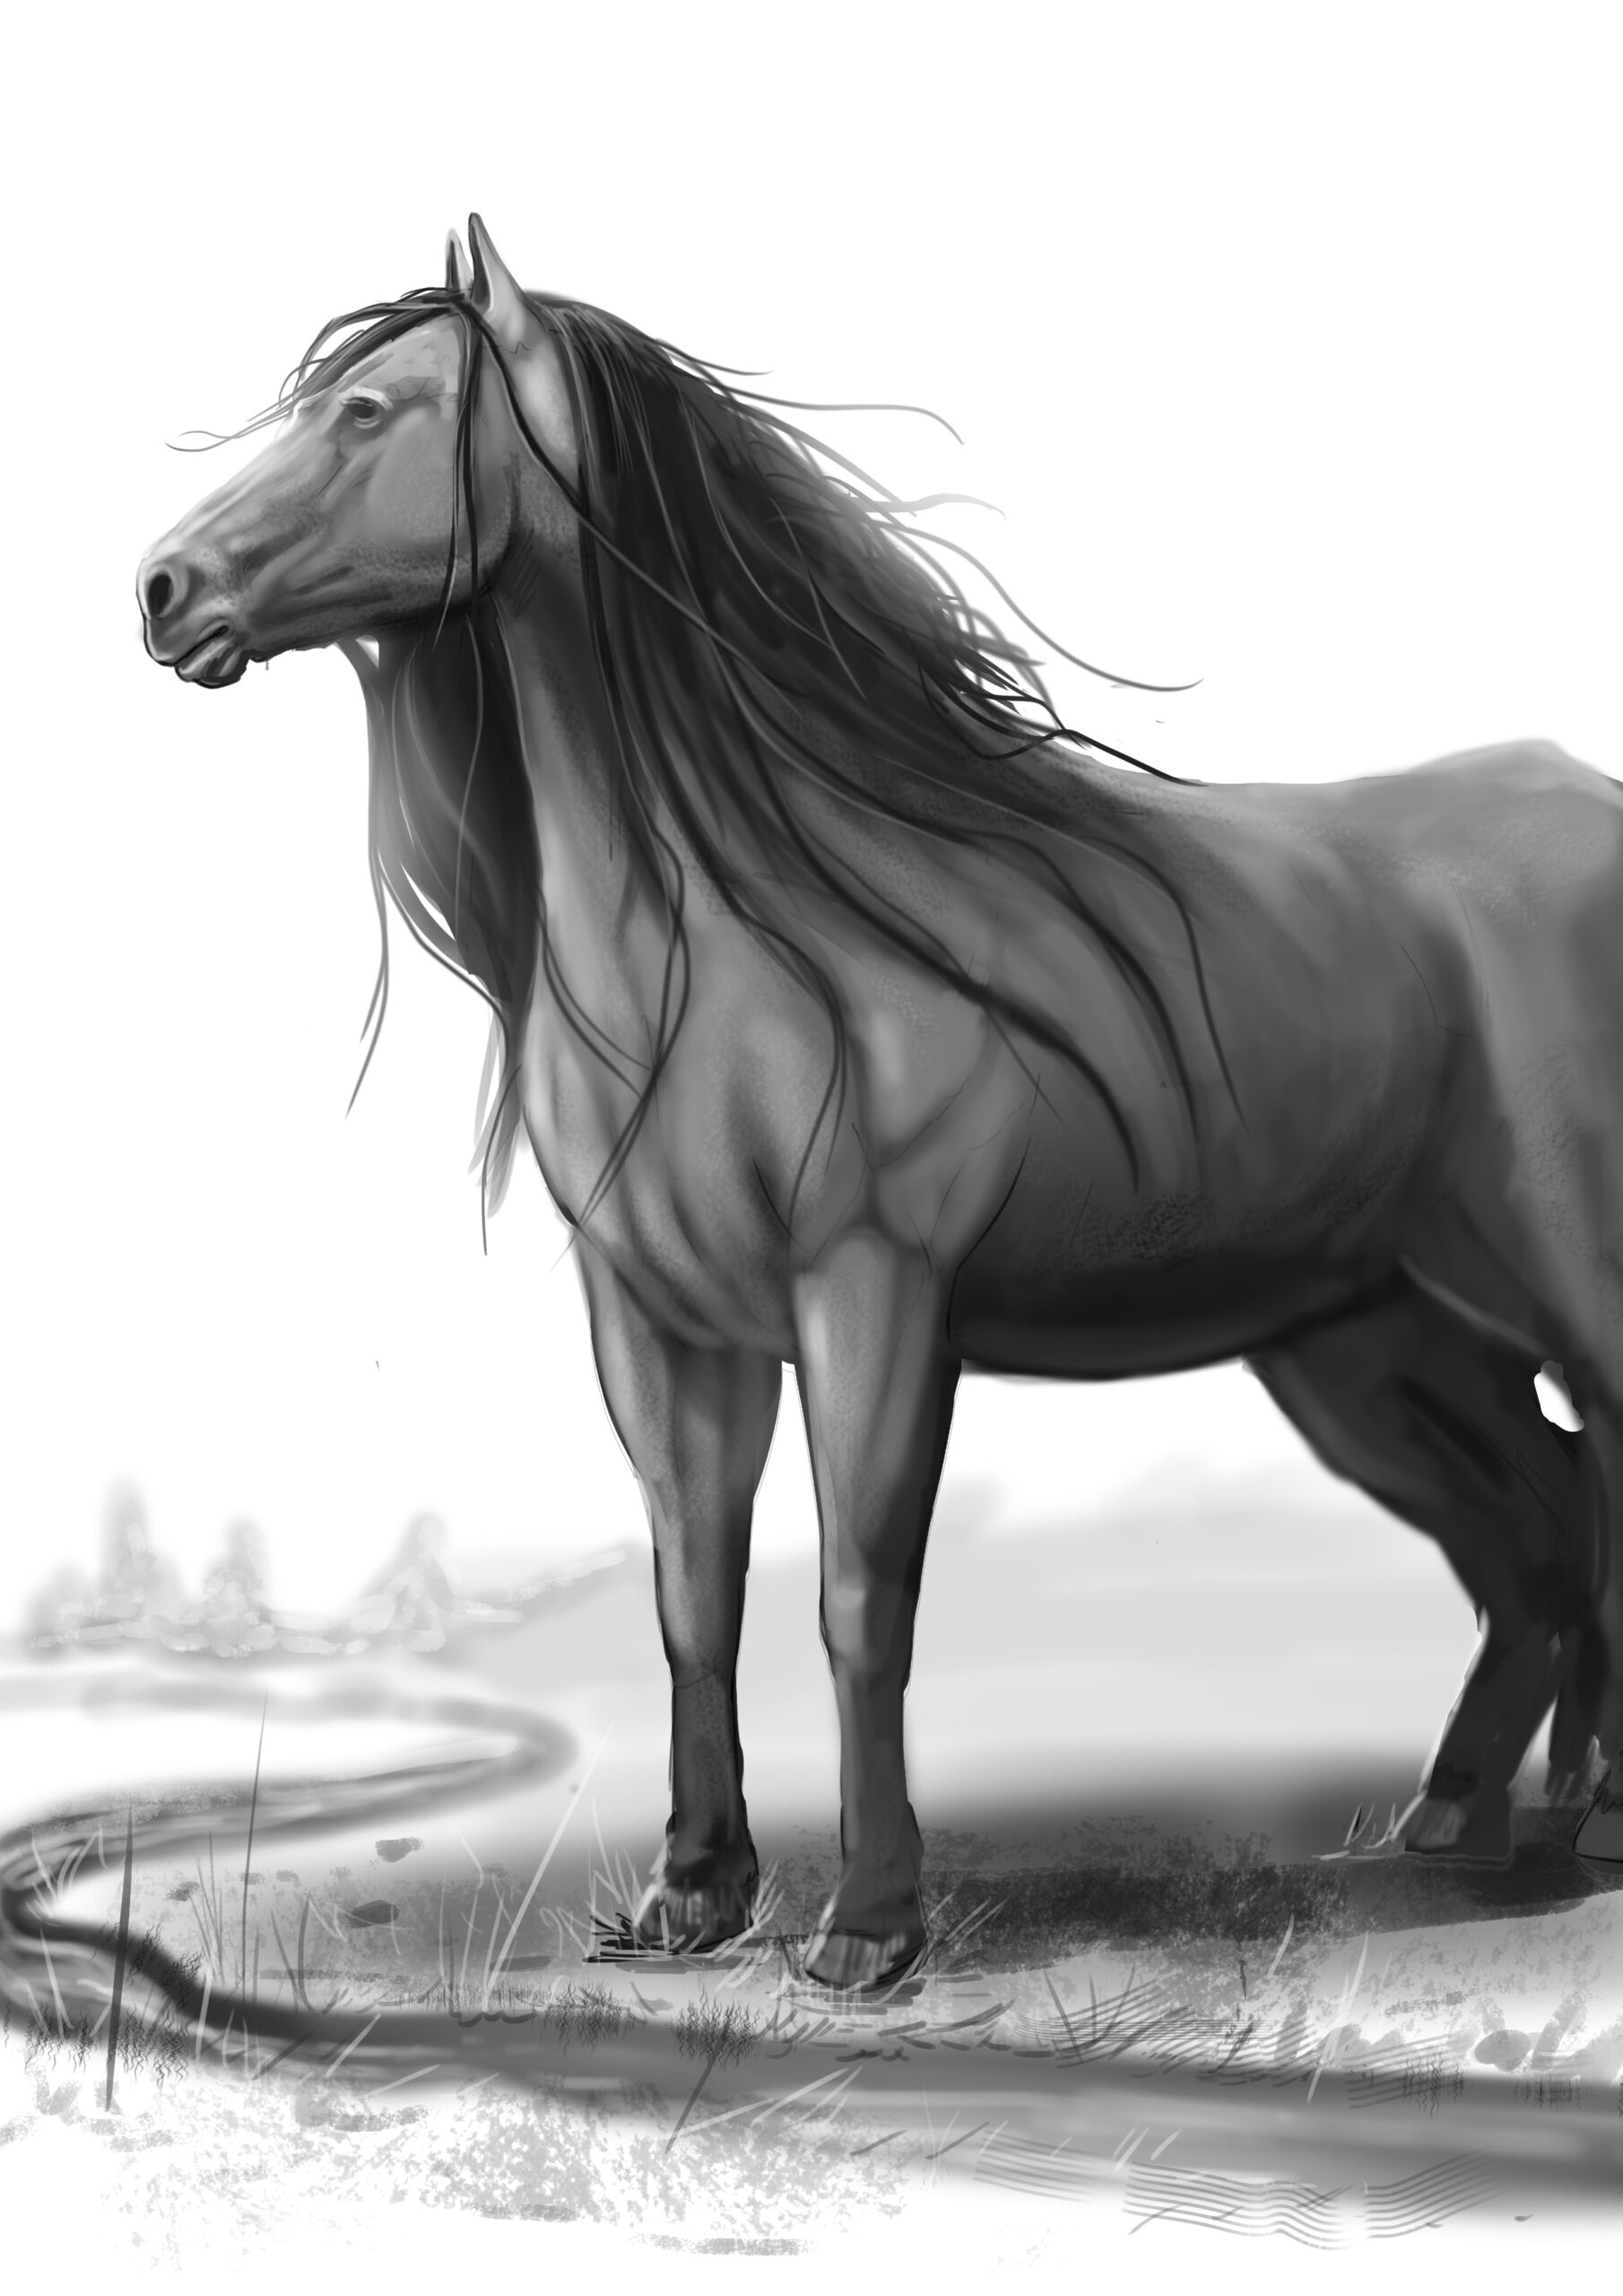 Highly sentient horse species by The Noble Artist for fantasy novel.